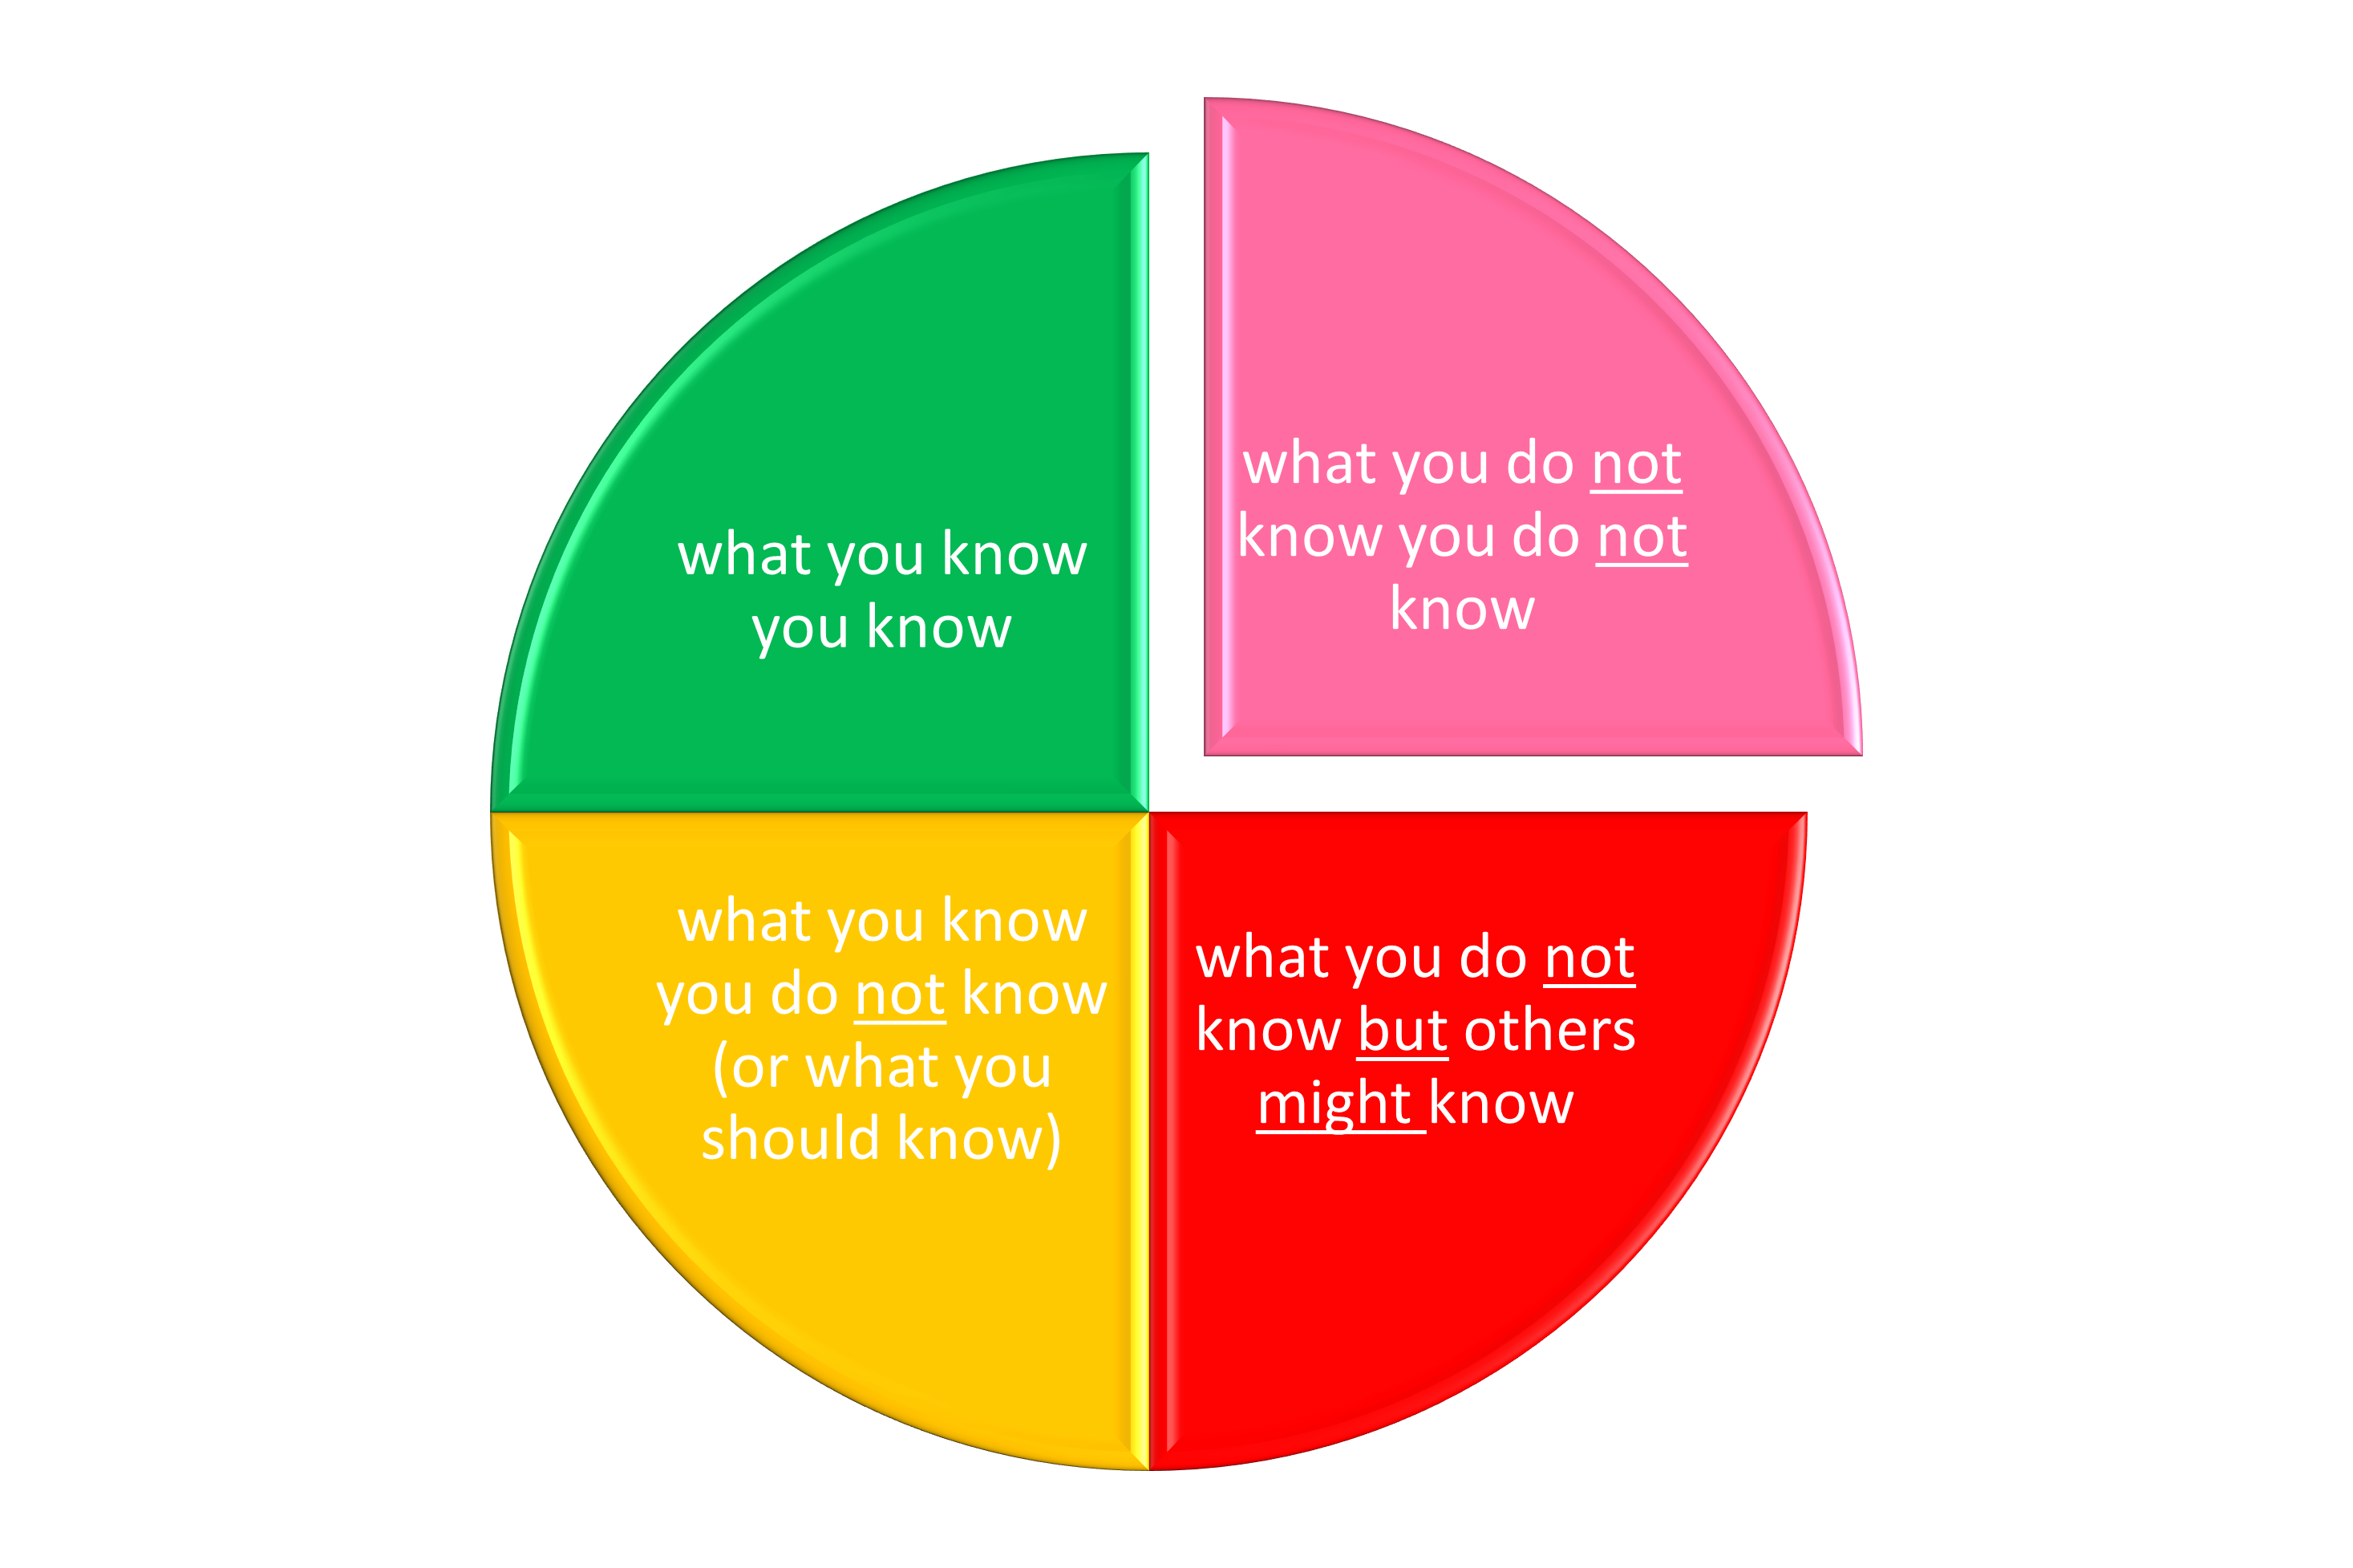 pie chart with four slices - one highlights the pink slice - what you don't know you don't know.